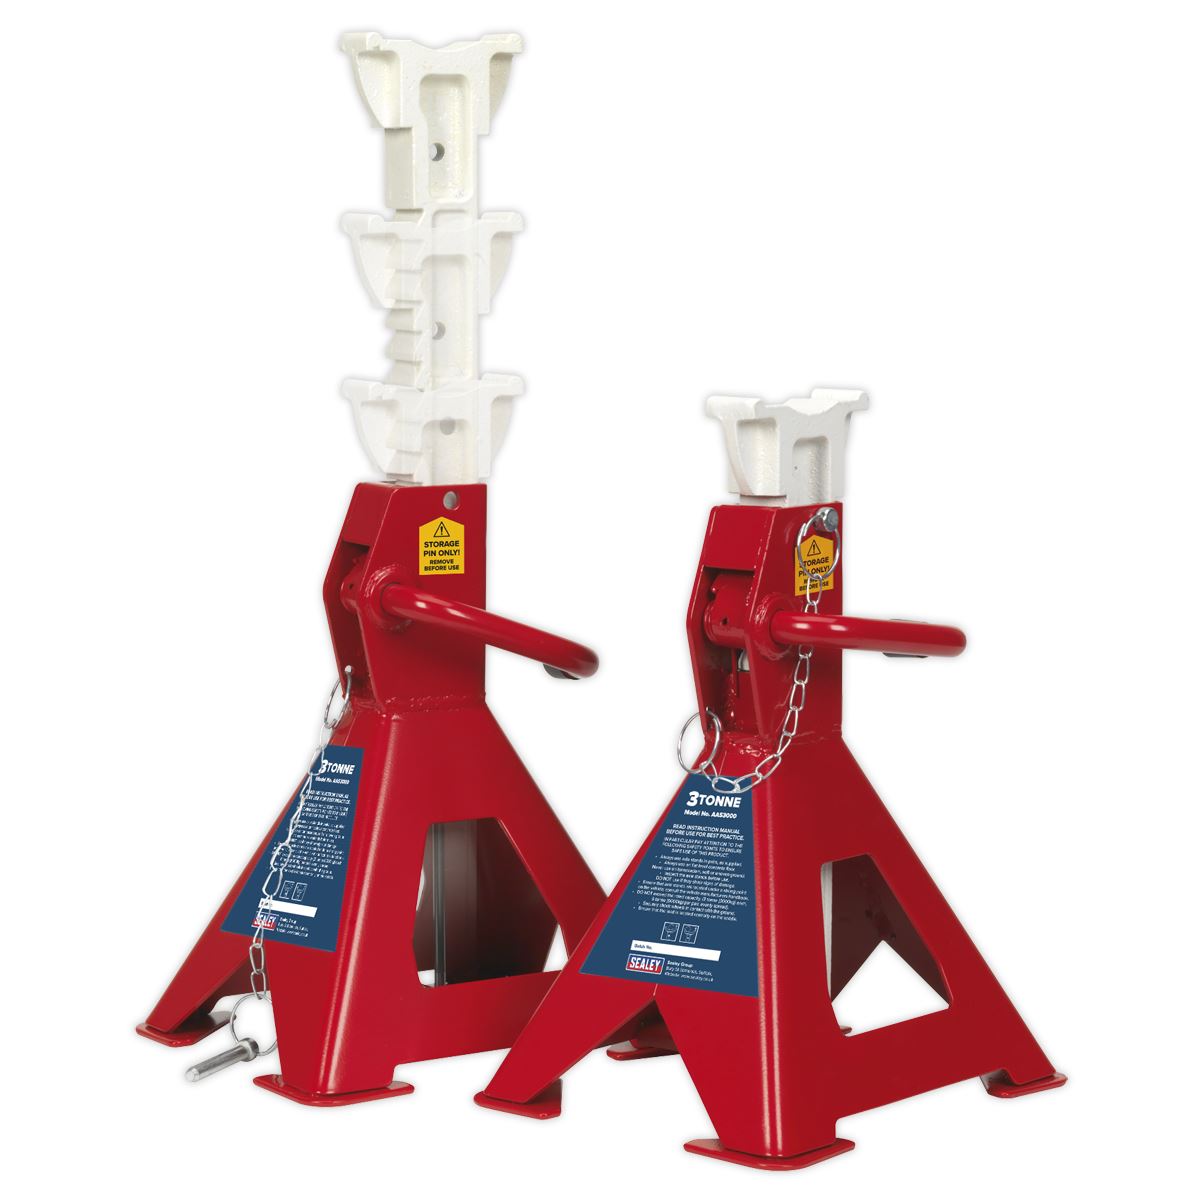 Sealey Axle Stands (Pair) 3tonne Capacity per Stand Auto Rise Ratchet